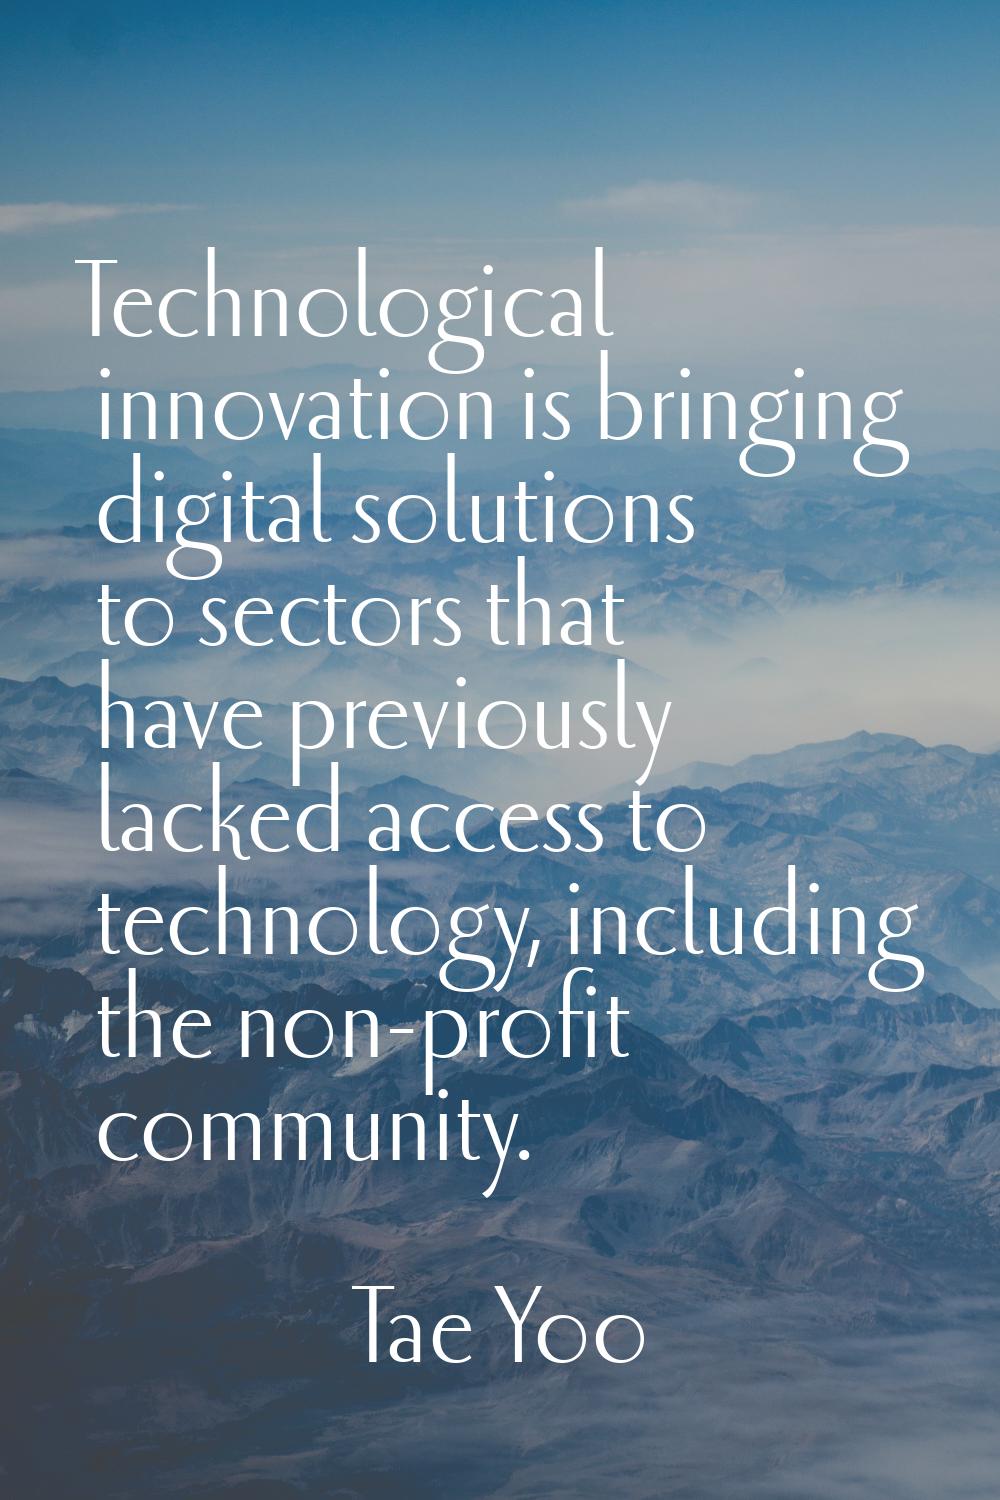 Technological innovation is bringing digital solutions to sectors that have previously lacked acces